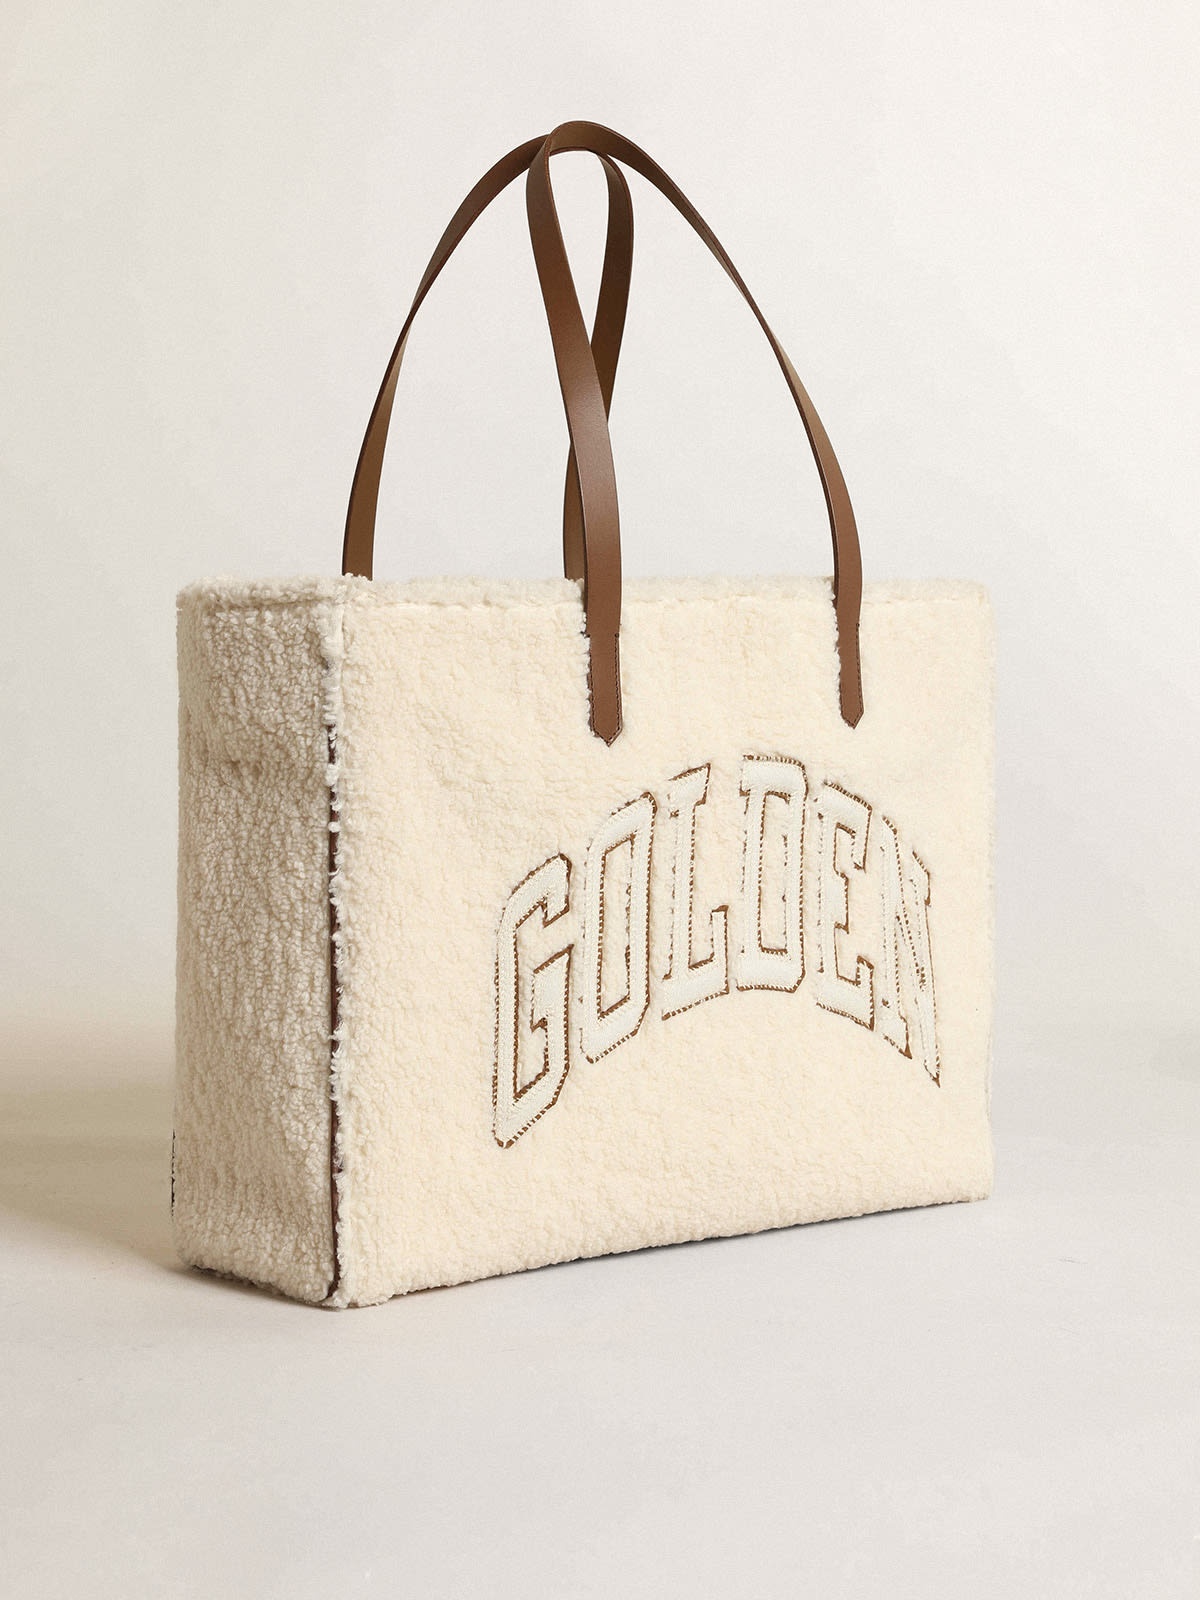 East-West California Bag in white faux fur with Golden lettering and contrasting handles - 5